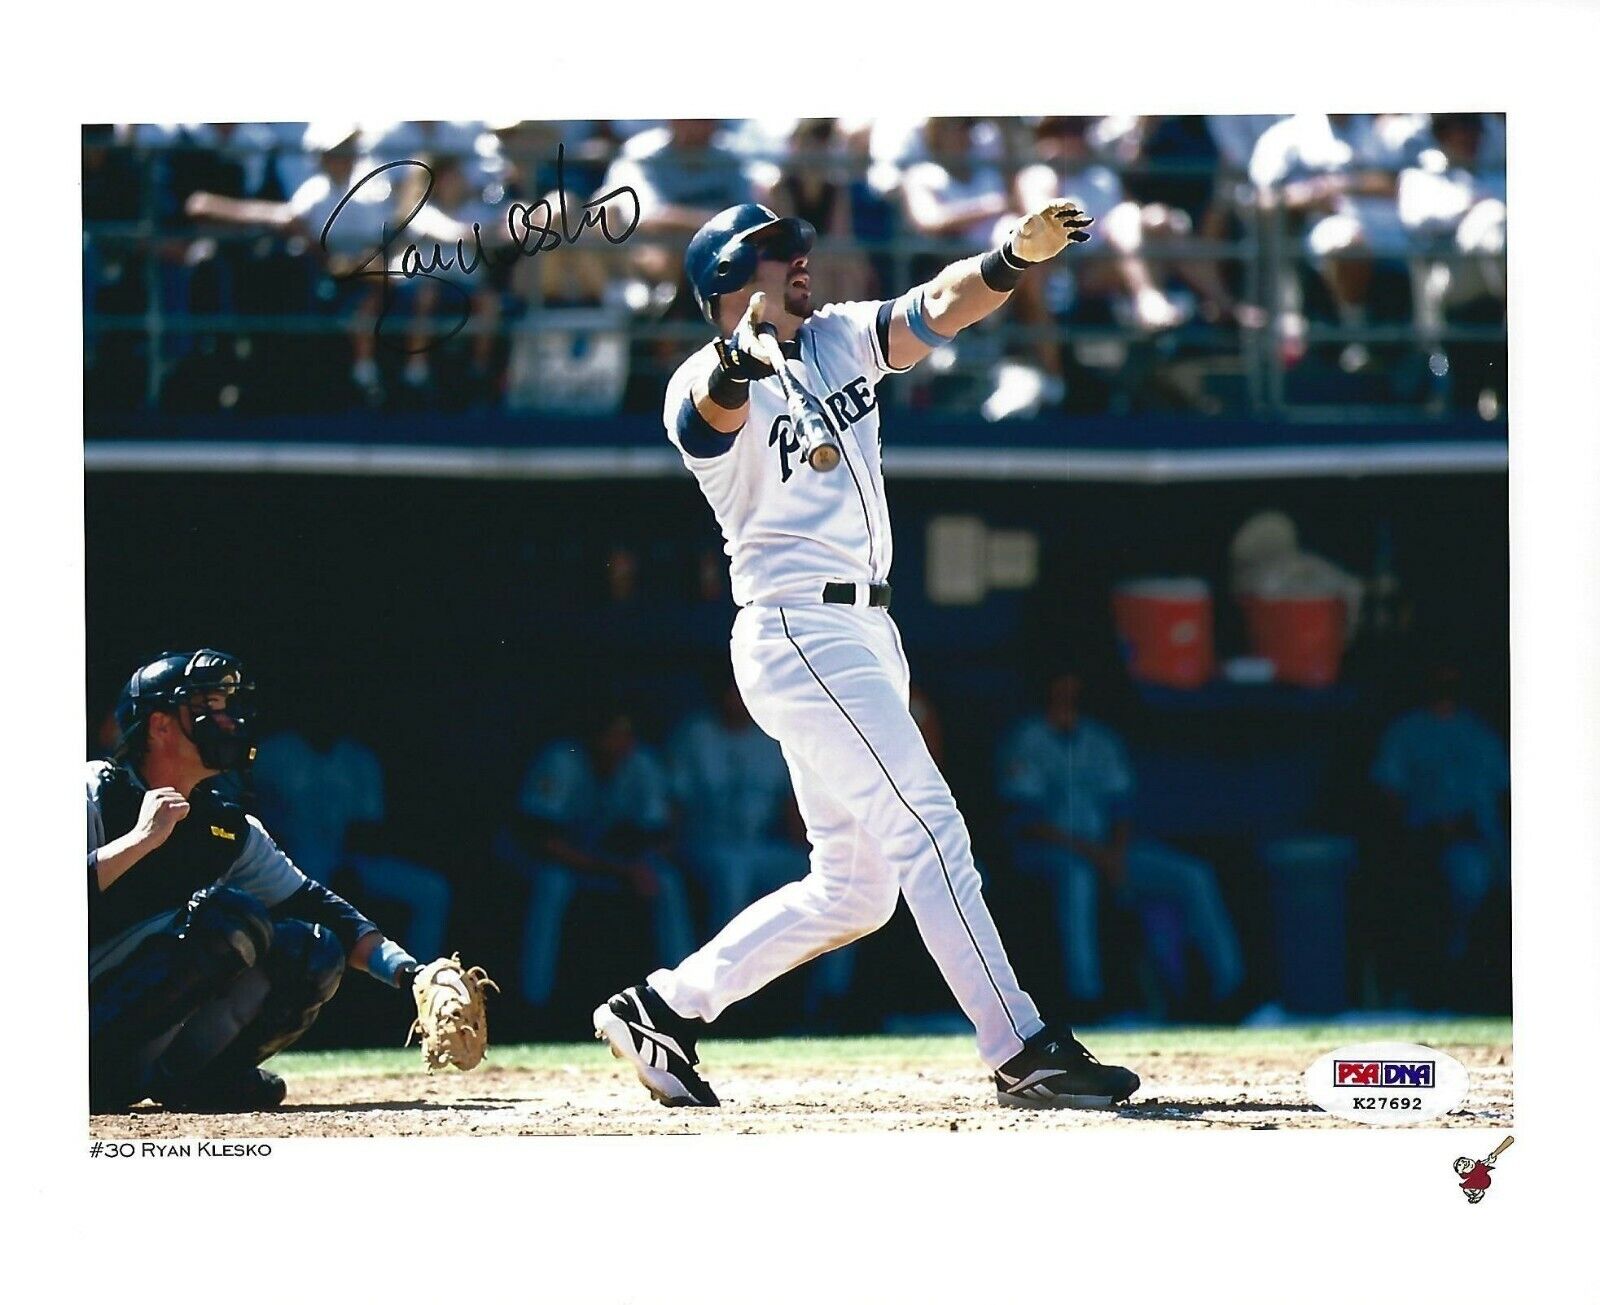 Ryan Klesko Signed 8x10 Photo Poster painting PSA/DNA COA 2001 Padres Baseball Picture Autograph